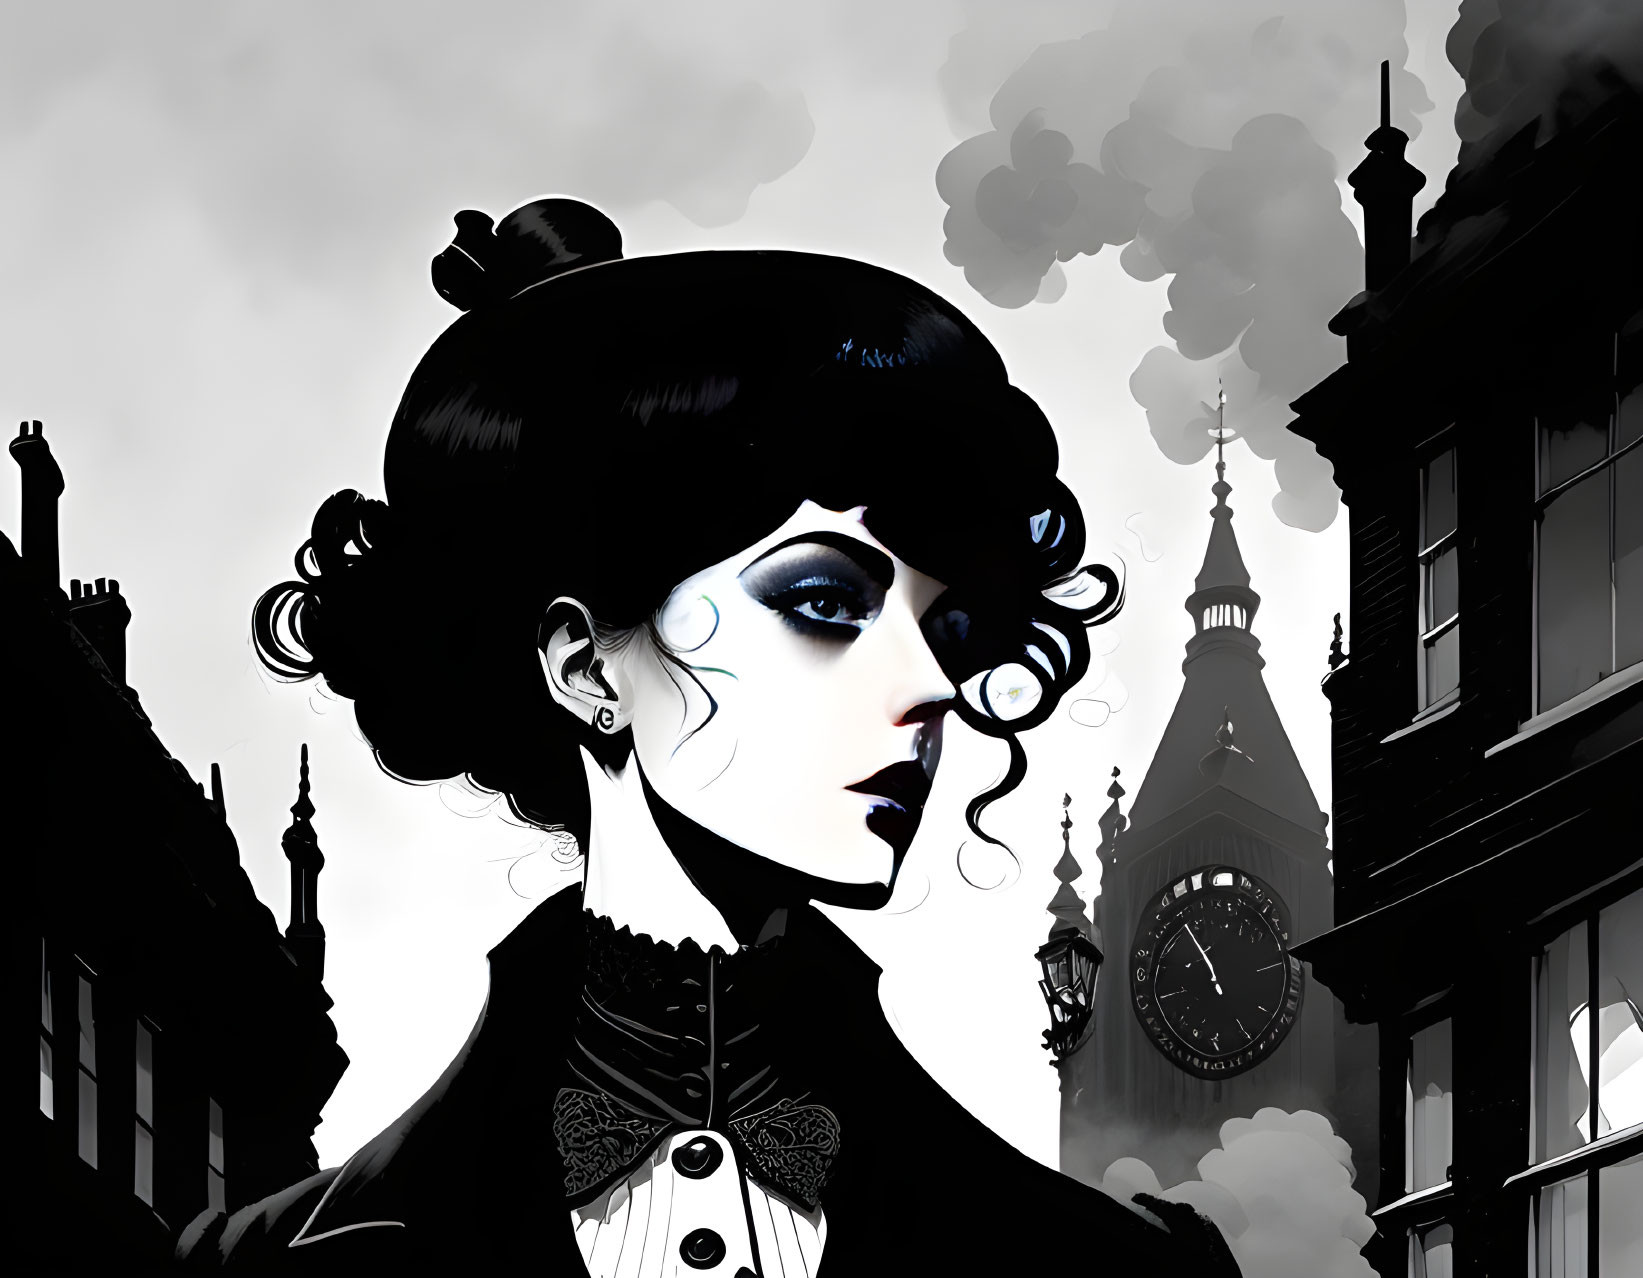 Stylized Victorian woman against Big Ben and London rooftops